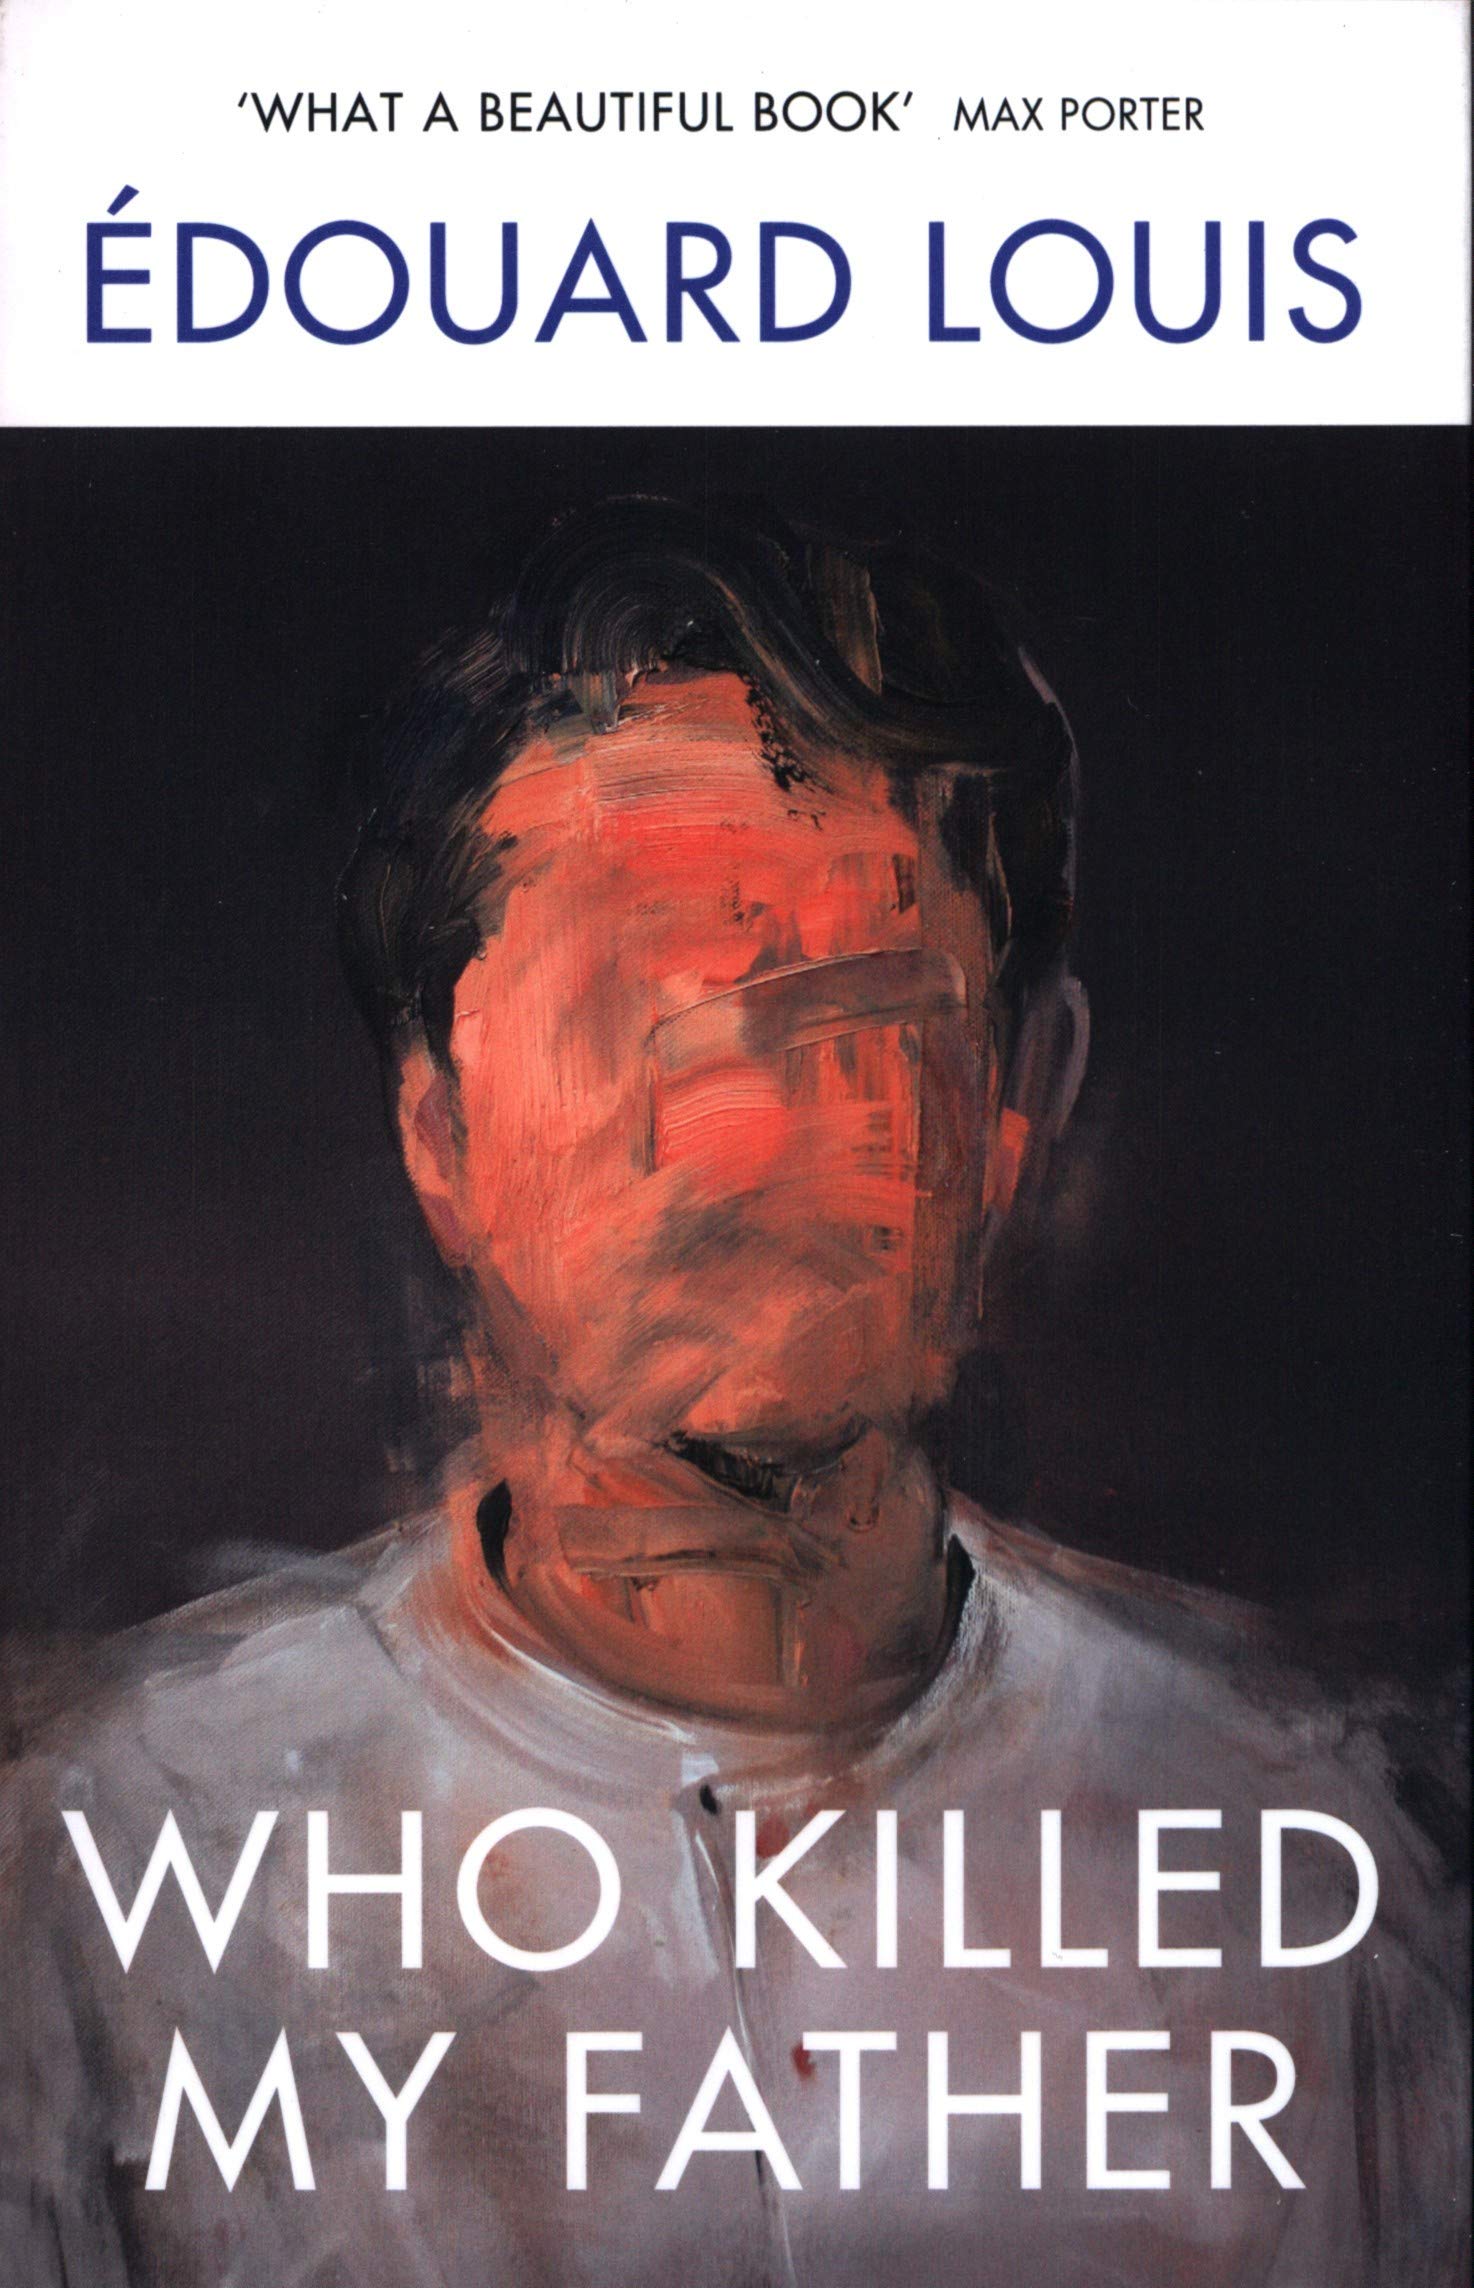 Who Killed My Father | Edouard Louis carturesti.ro poza bestsellers.ro